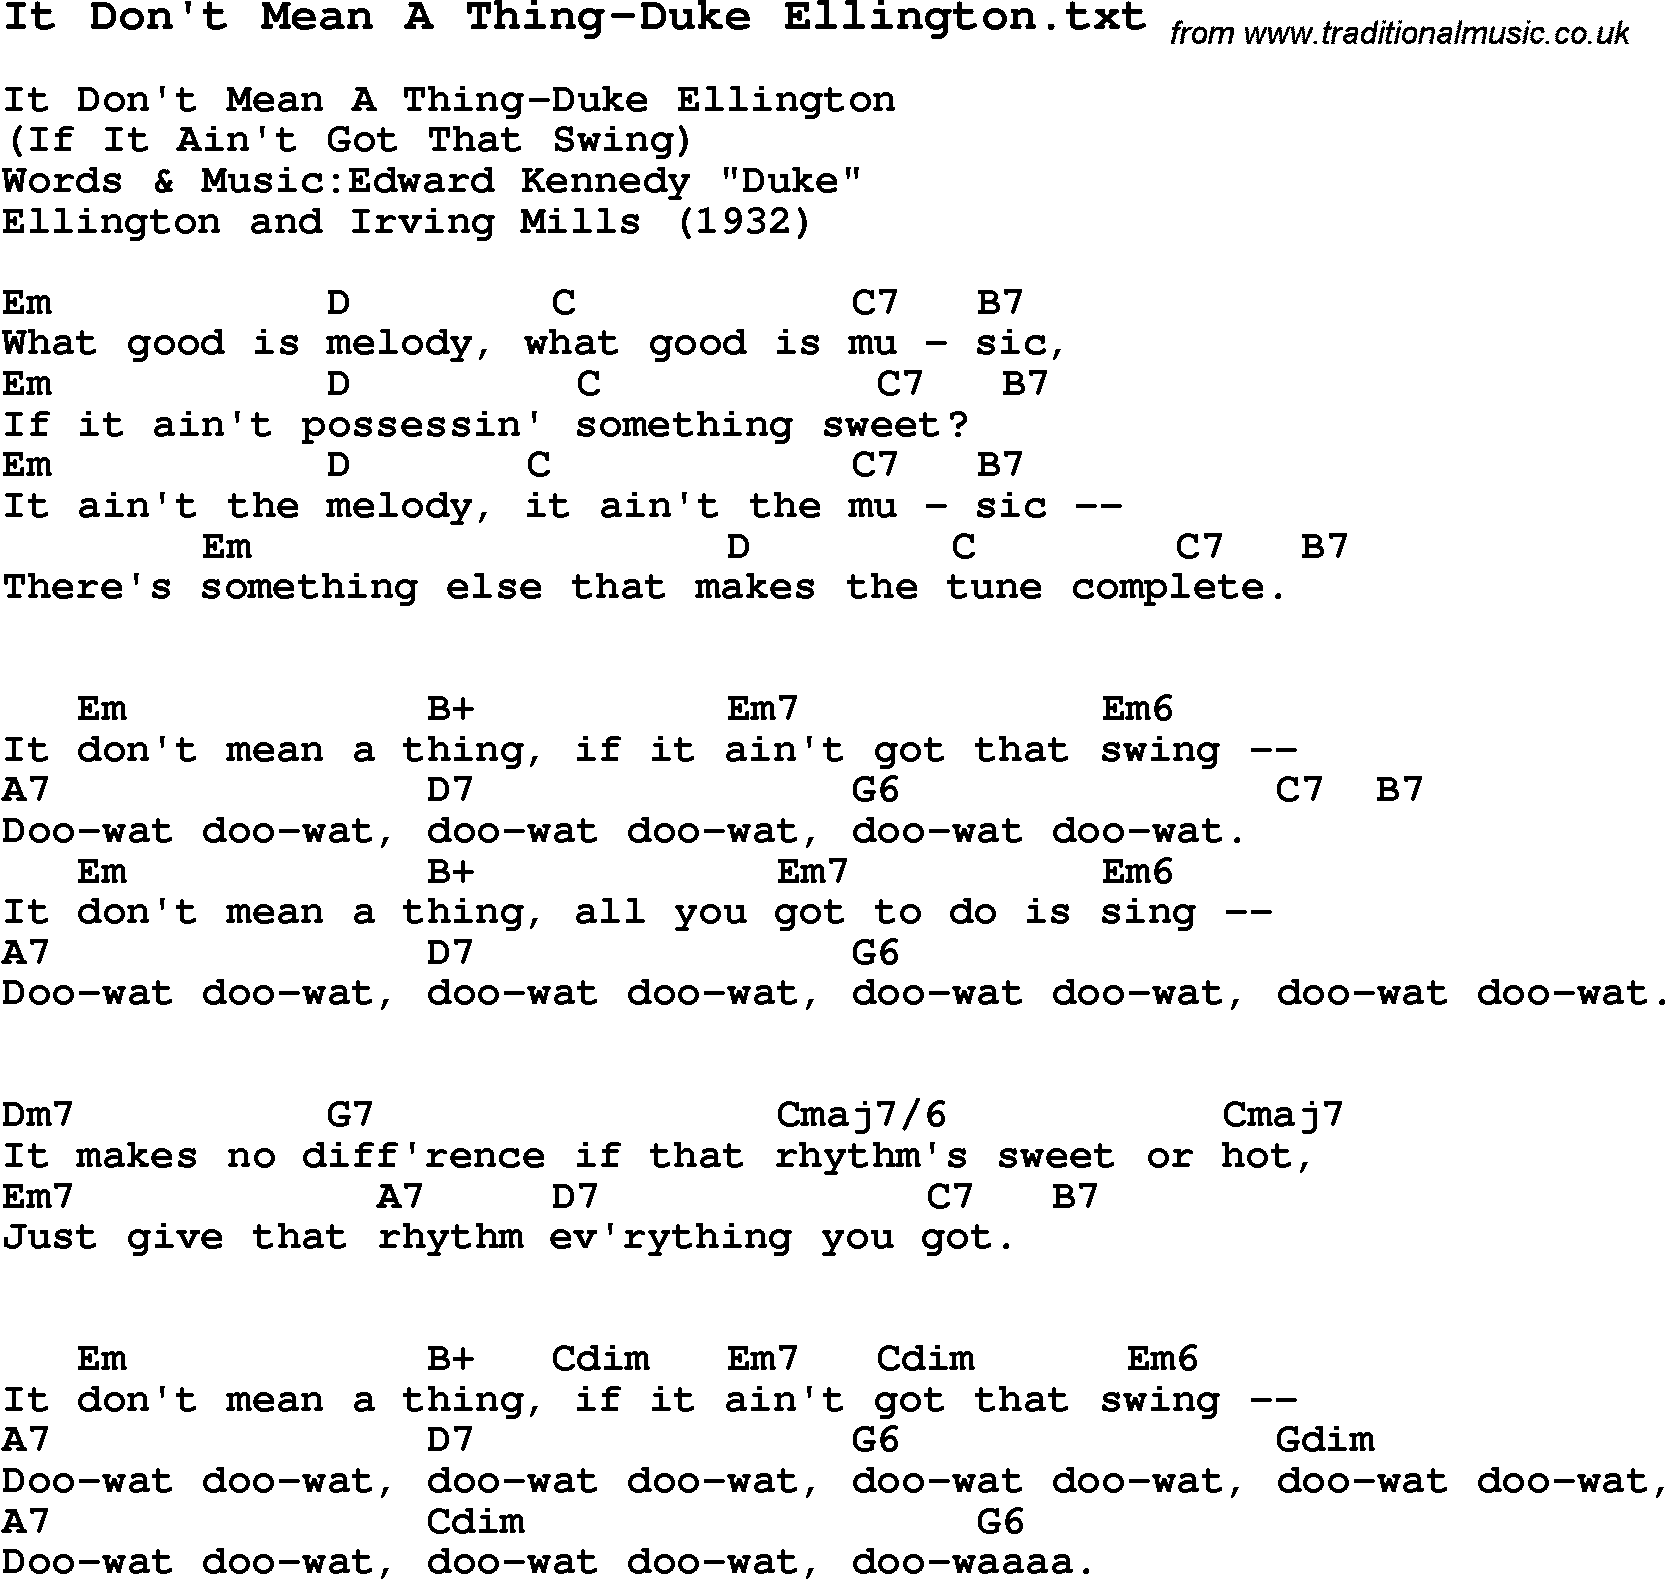 Jazz Song from top bands and vocal artists with chords, tabs and lyrics - It Don't Mean A Thing-Duke Ellington